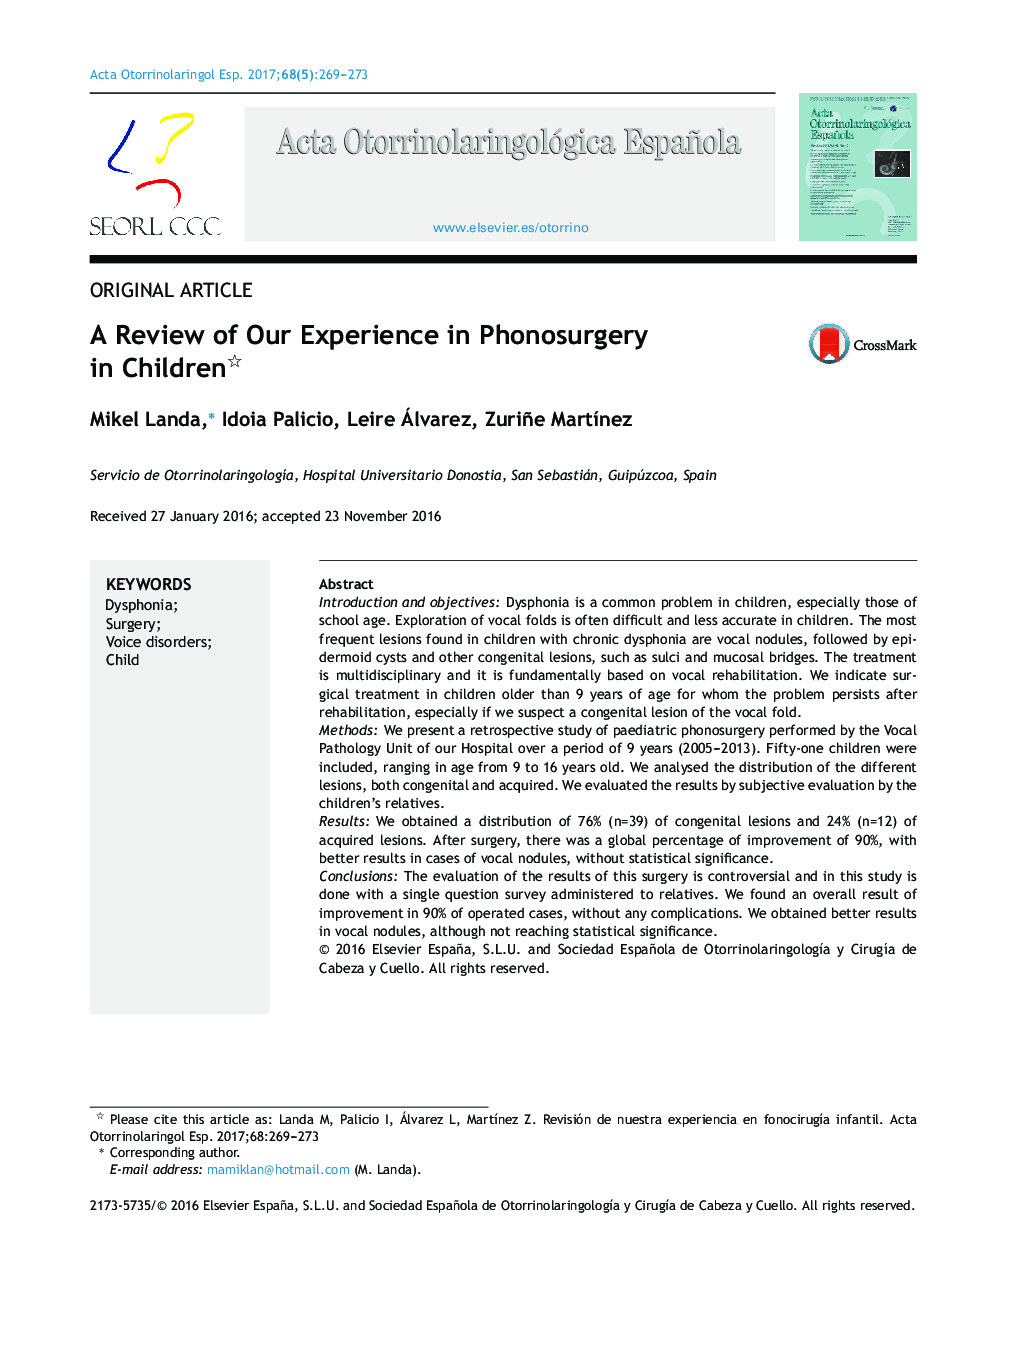 A Review of Our Experience in Phonosurgery in Children